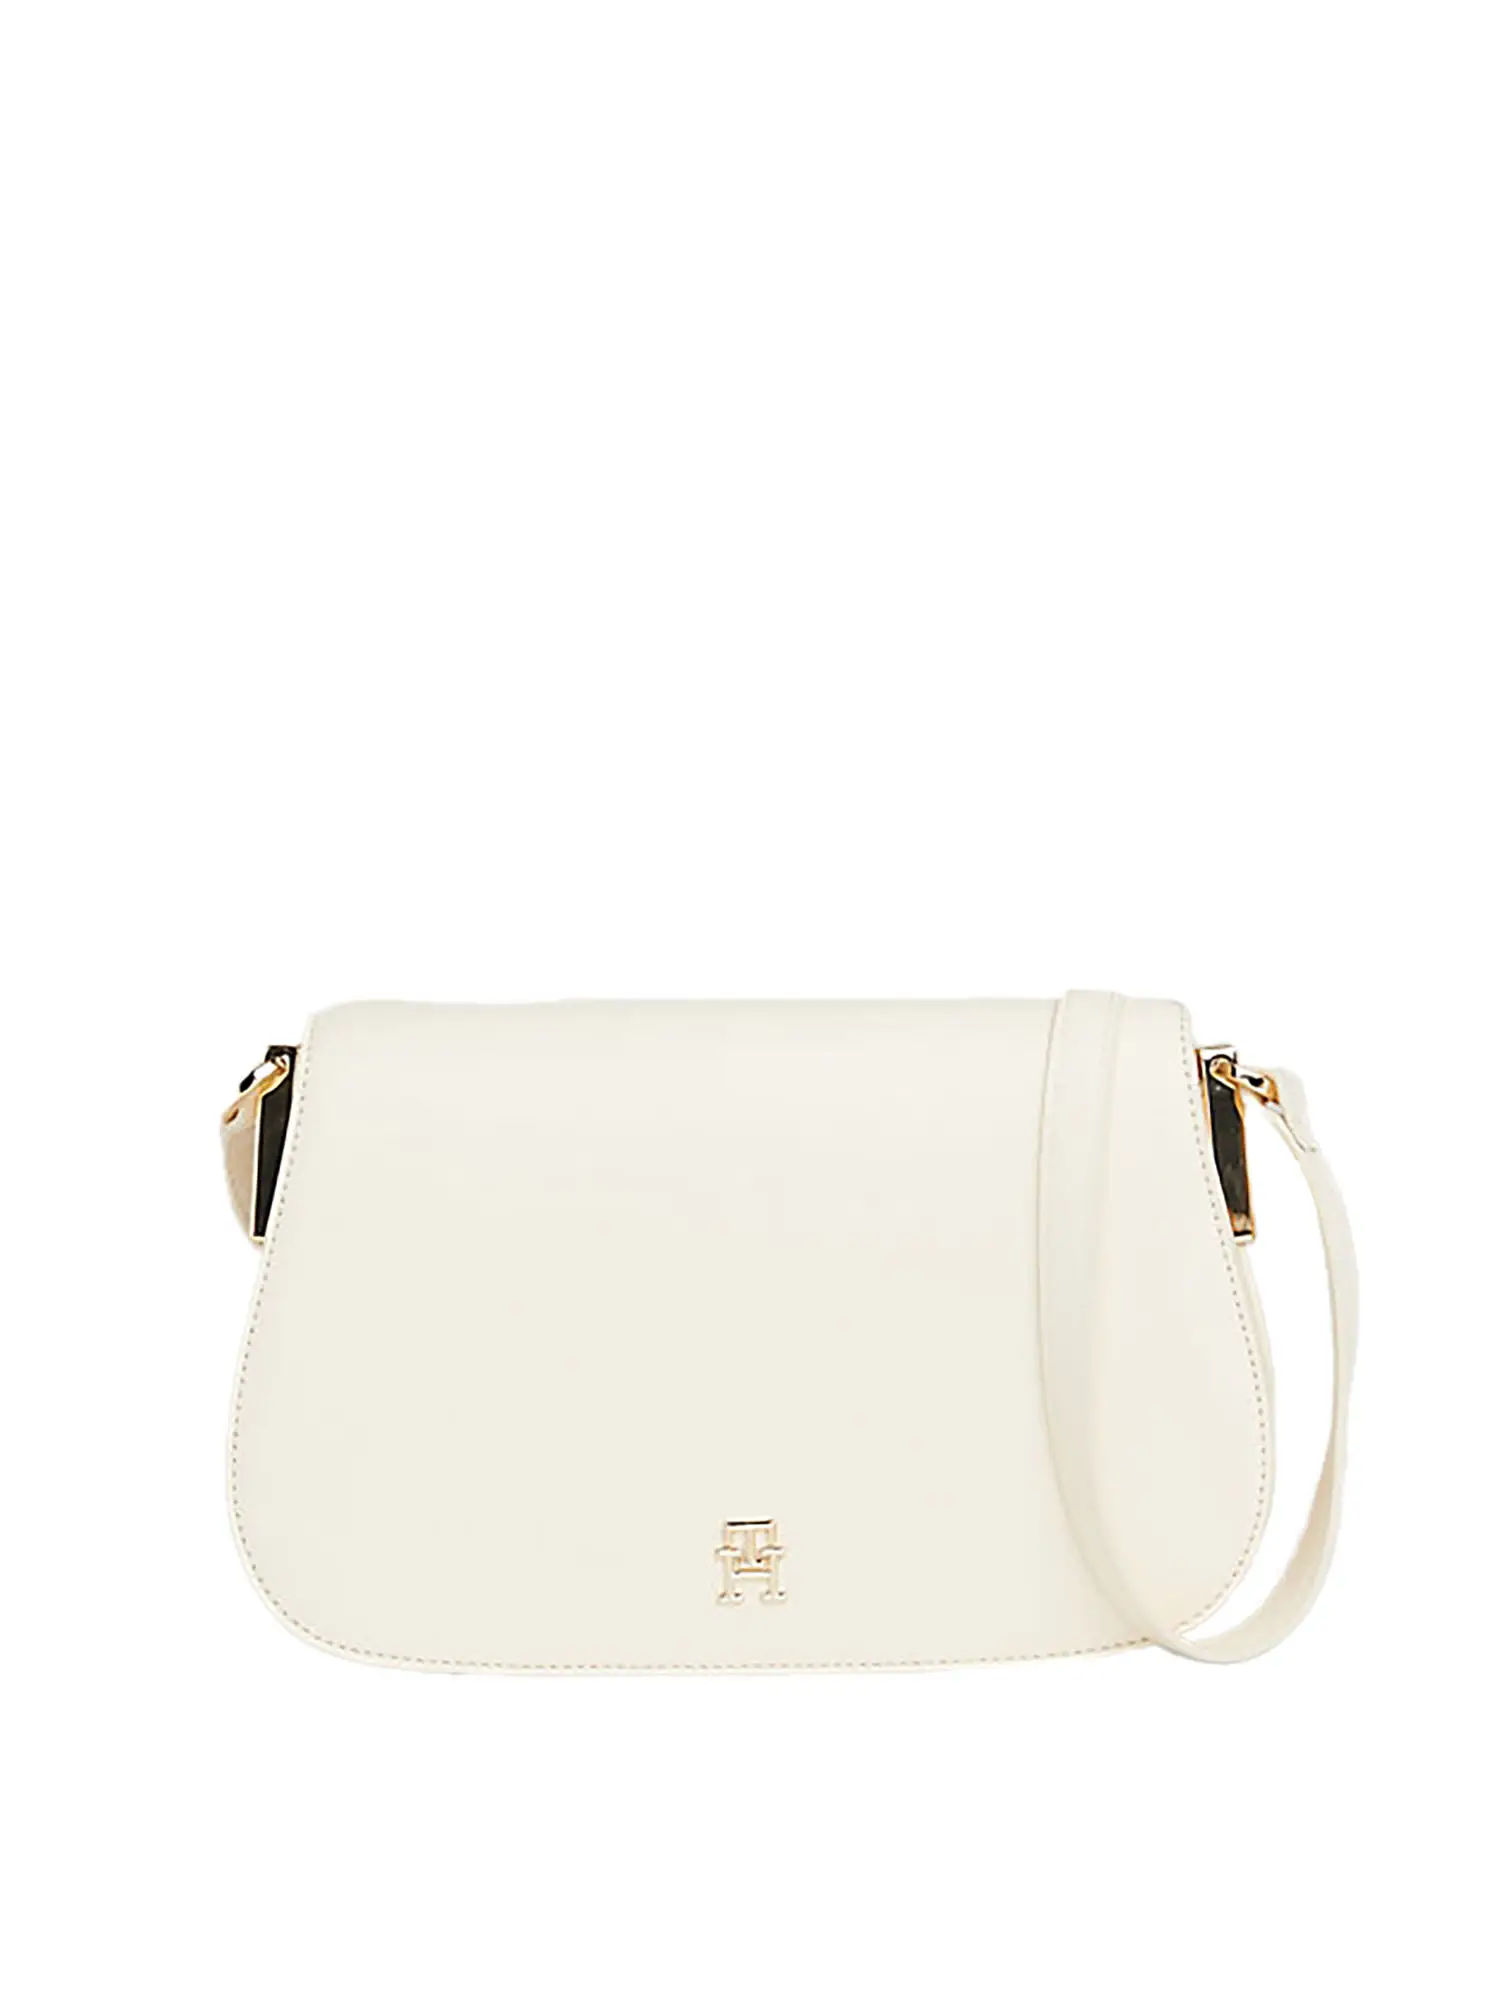 TRACOLLA DONNA - TOMMY HILFIGER - AW0AW15974 - BIANCO, UNICA